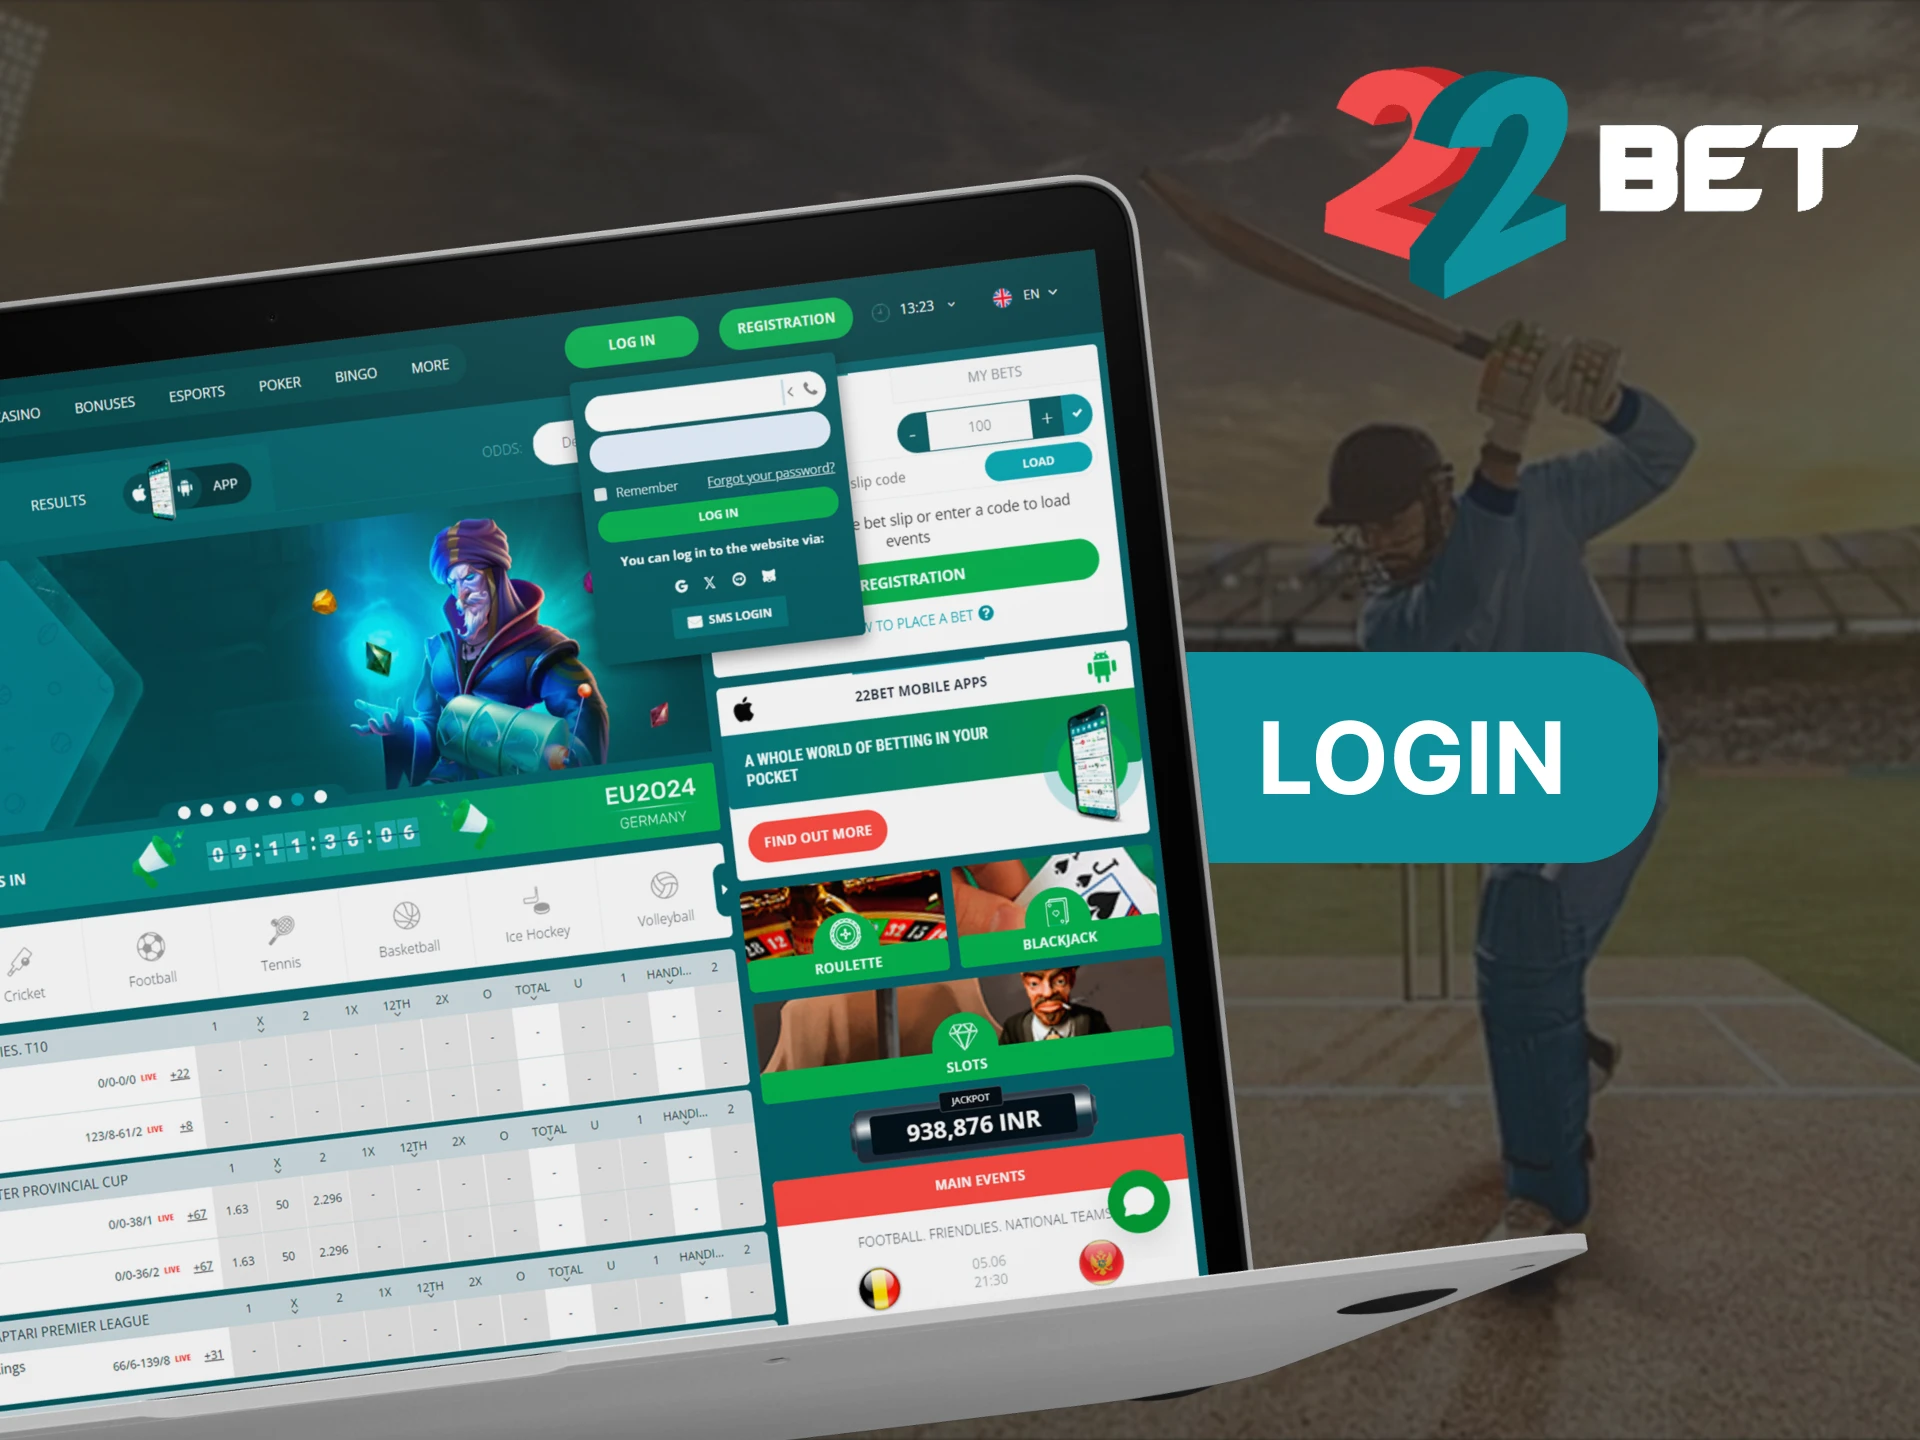 Login to 22Bet if you already have an account.